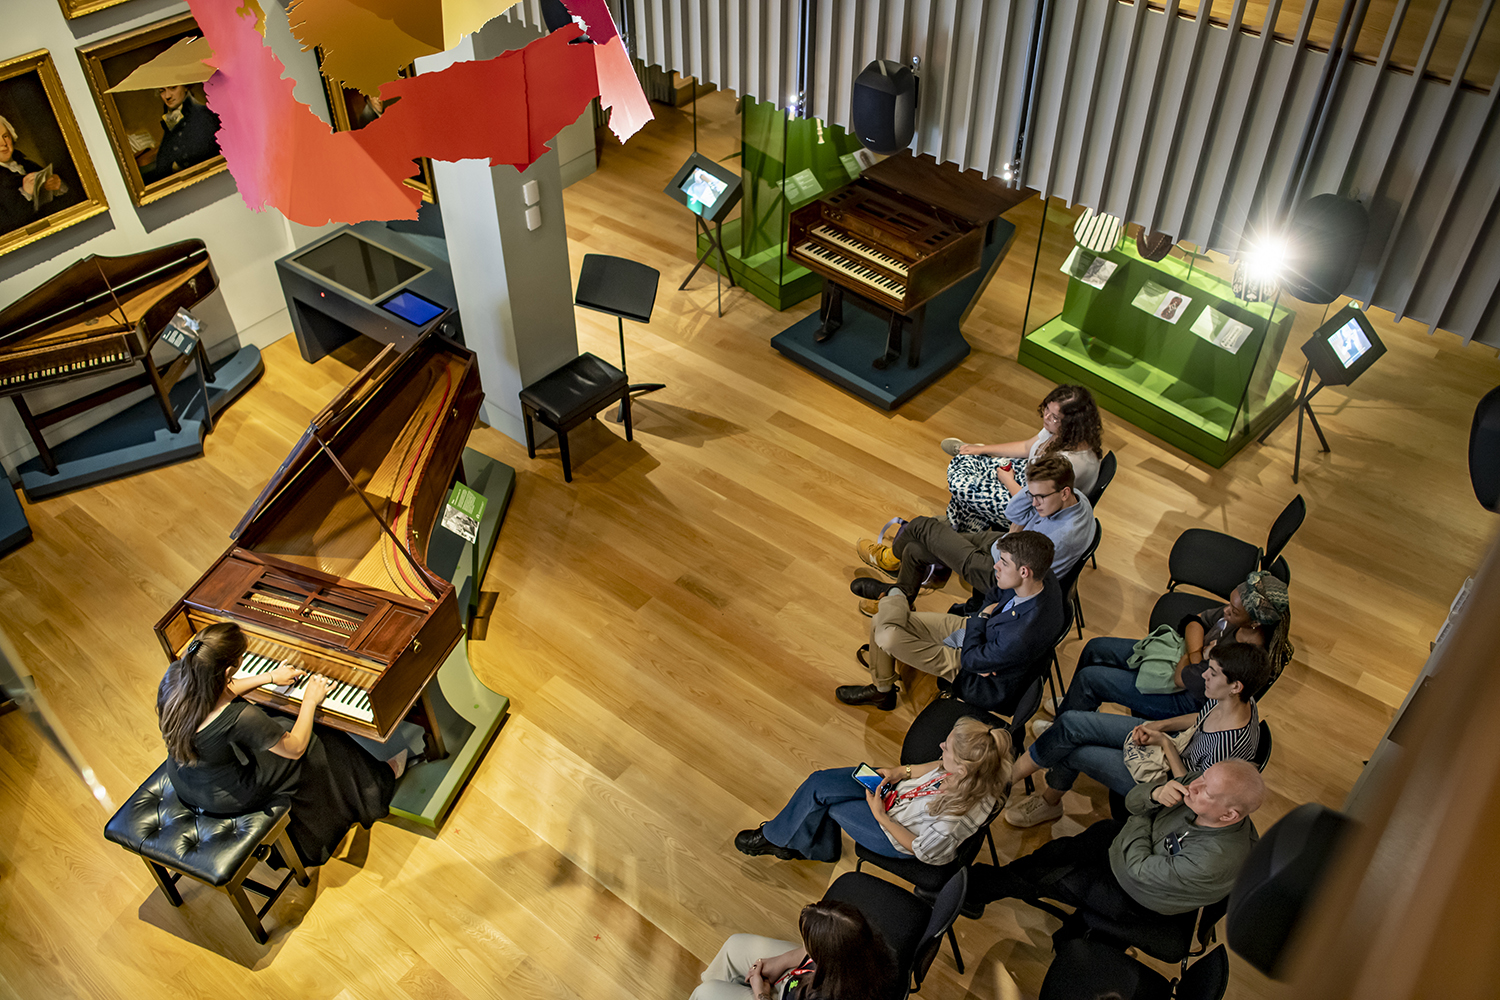 An audience watching a performer playing the piano in the RCM Museum